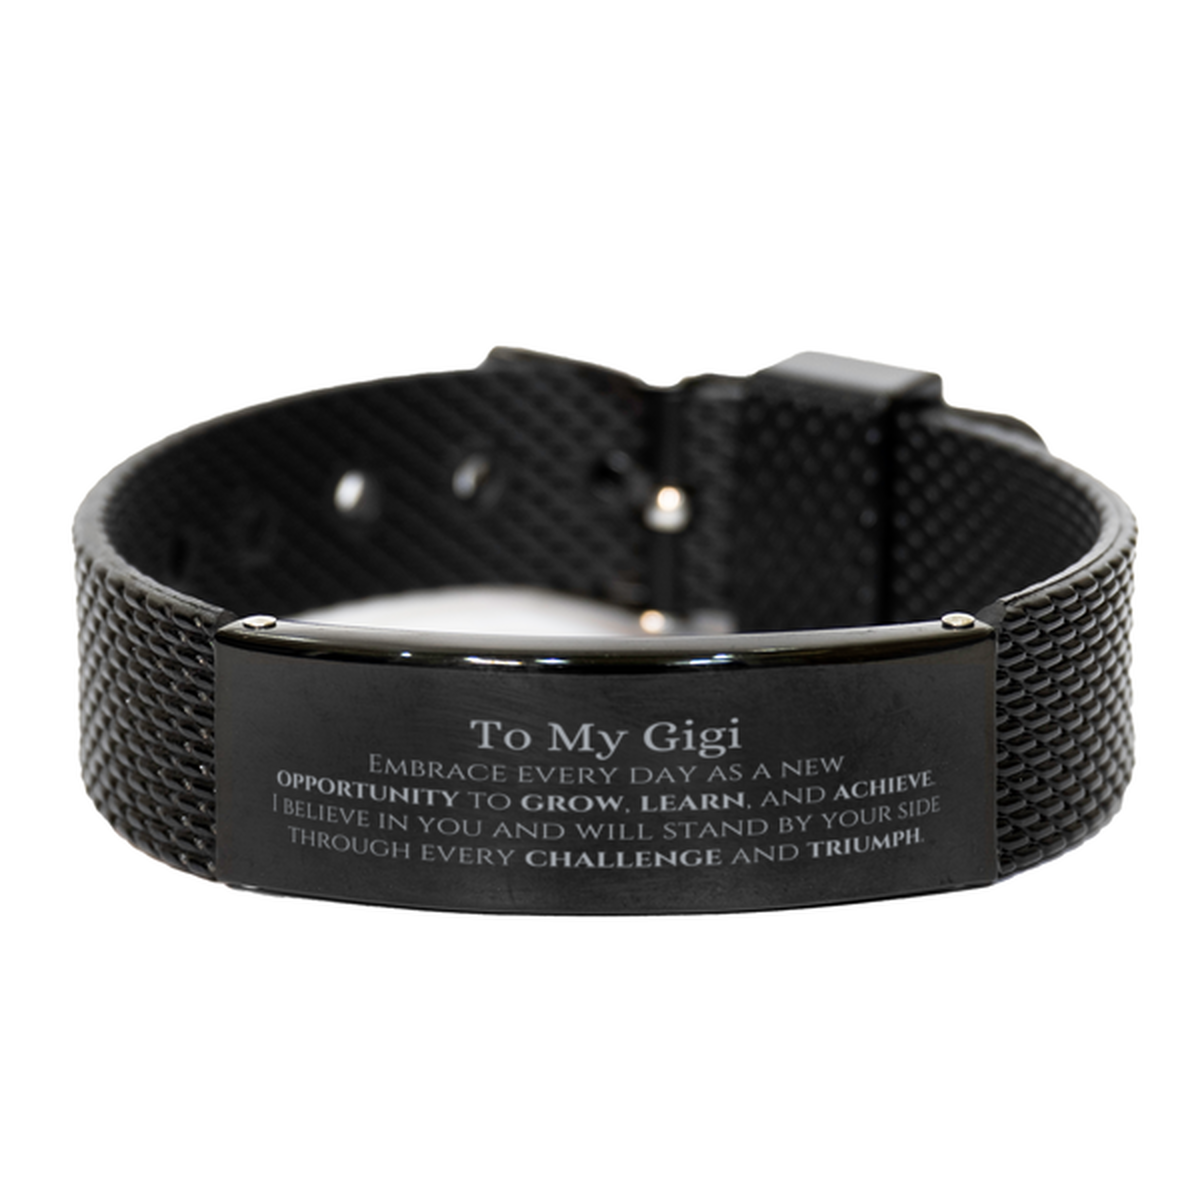 To My Gigi Gifts, I believe in you and will stand by your side, Inspirational Black Shark Mesh Bracelet For Gigi, Birthday Christmas Motivational Gigi Gifts